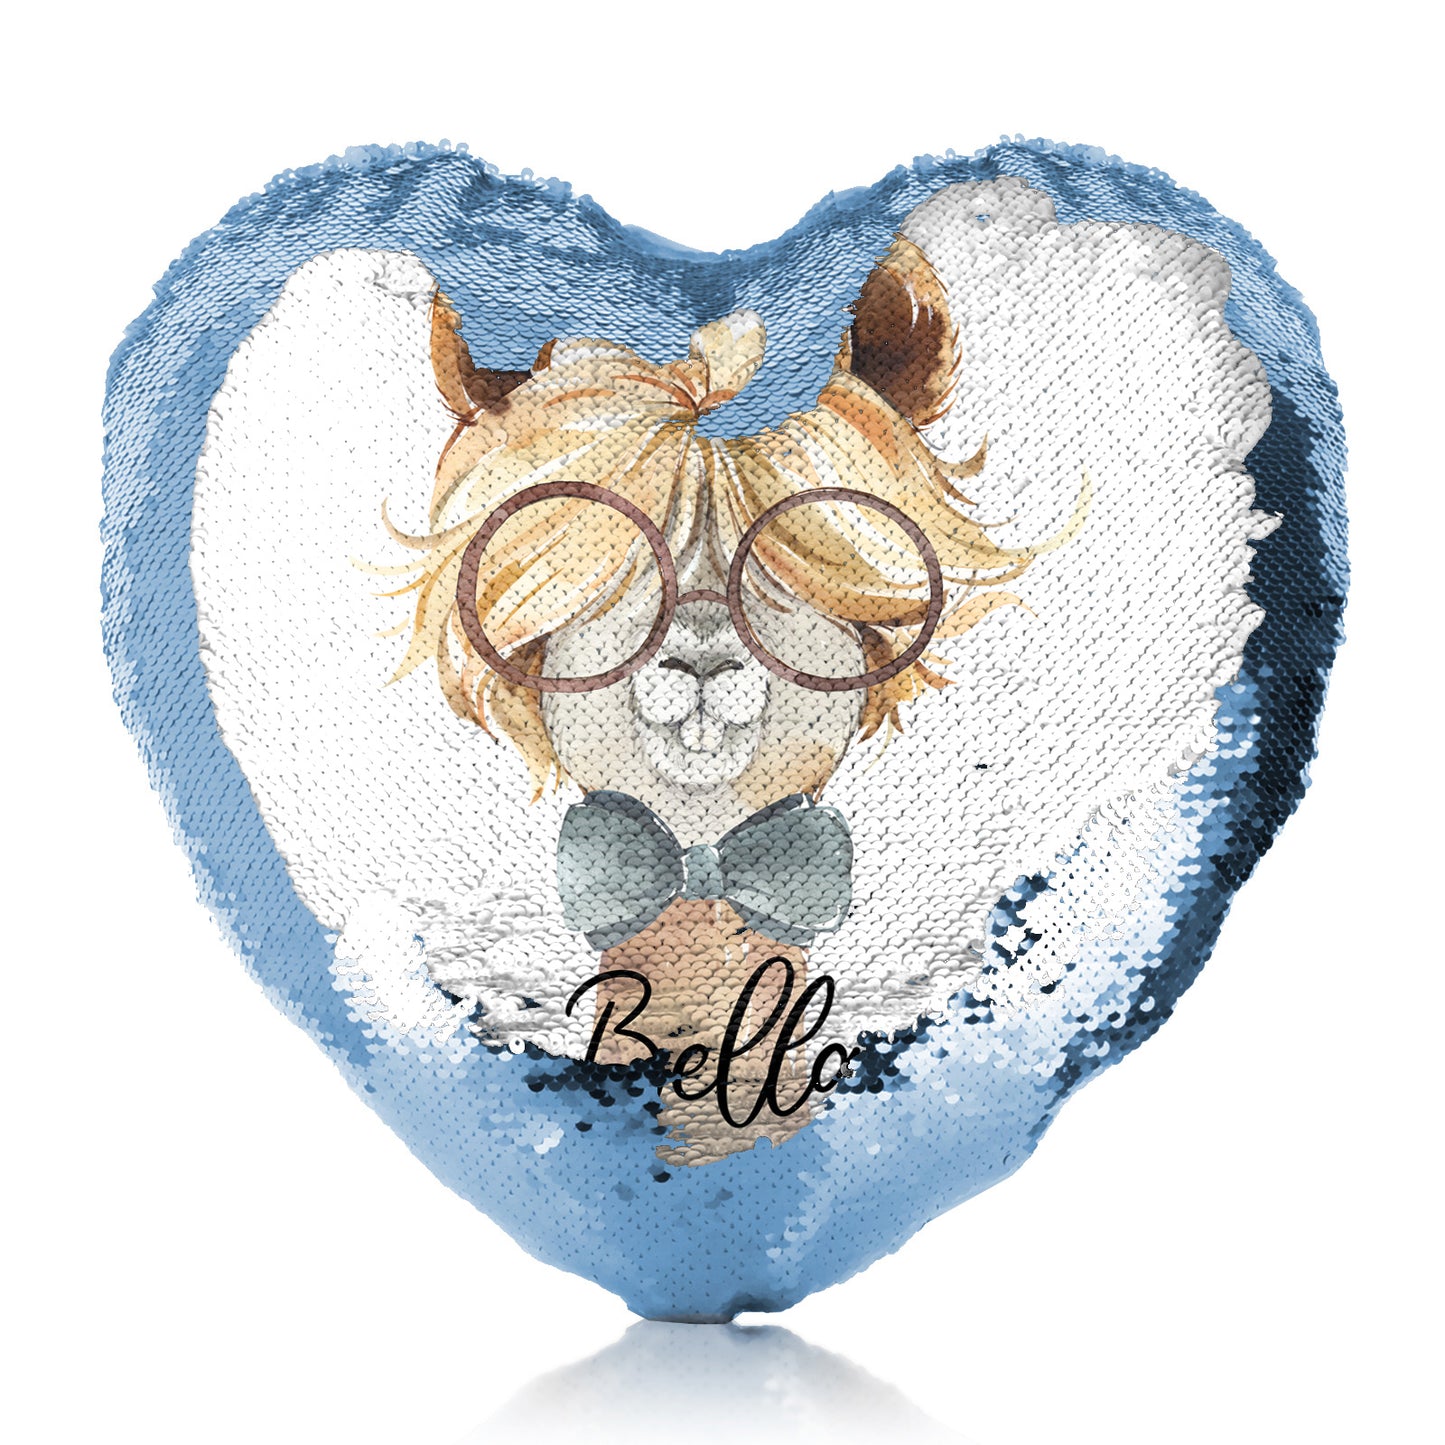 Personalised Sequin Heart Cushion with Alpaca Bow Tie and Glasses and Cute Text